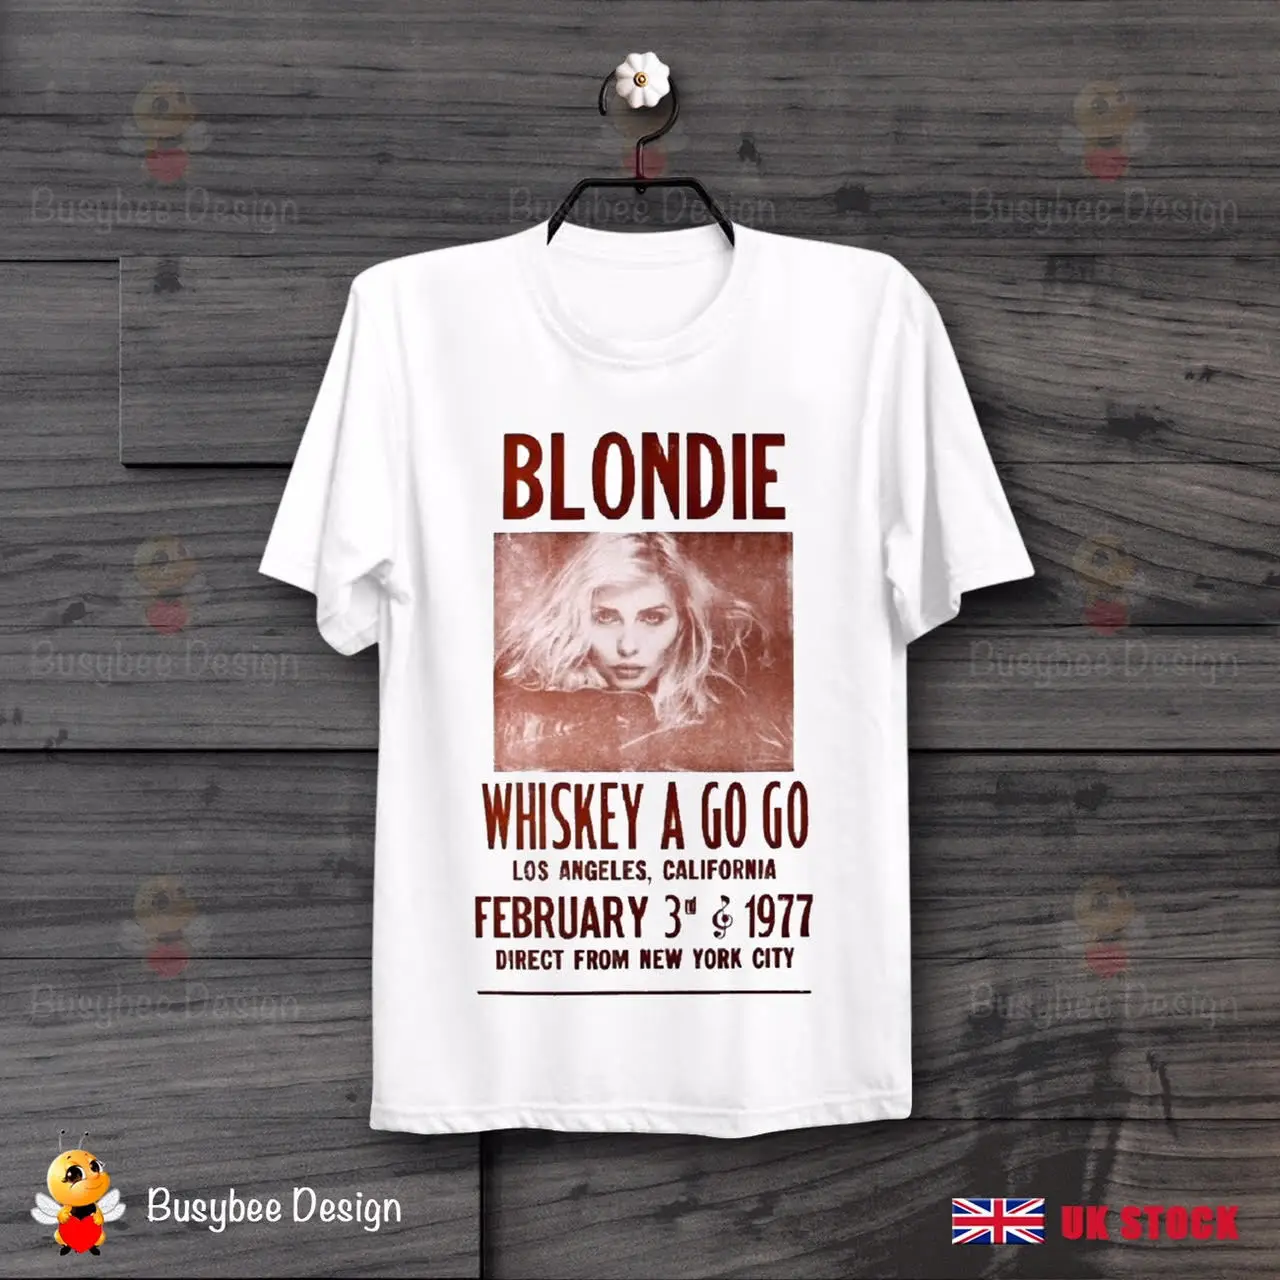 

Whiskey A Go Go Blondie 70s Retro CooL Poster Vintage Hipster Unisex T Shirt B5 Short Sleeves Cotton T-Shirt Fashion